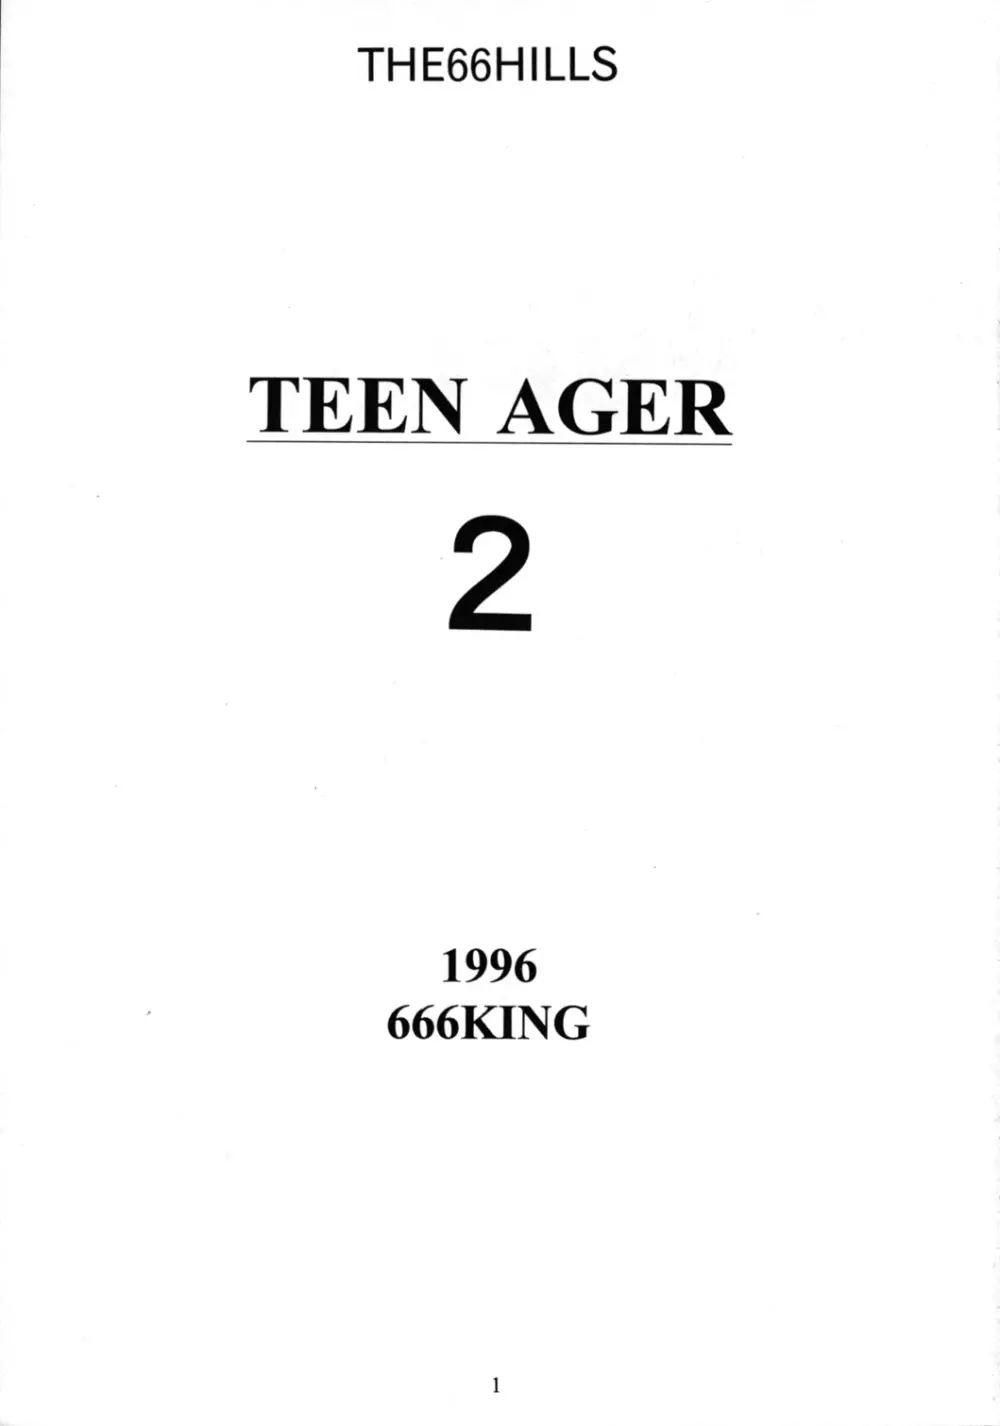 Teen-Ager 2 2ページ